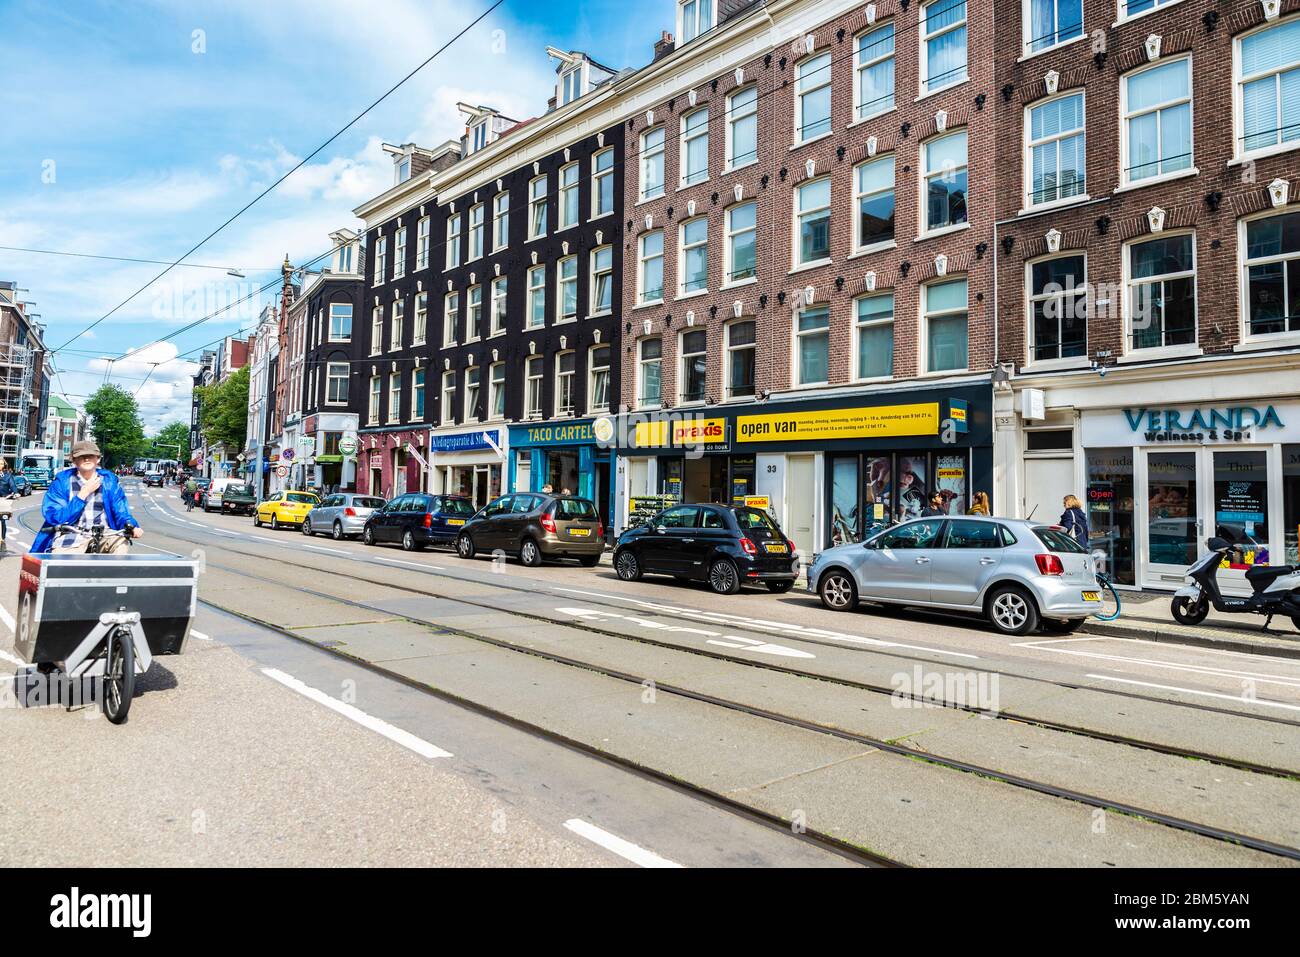 Amsterdam, Netherlands - September 8, 2018: Shopping street with a delivery bicycle and people around in the old town of Amsterdam, Netherlands Stock Photo